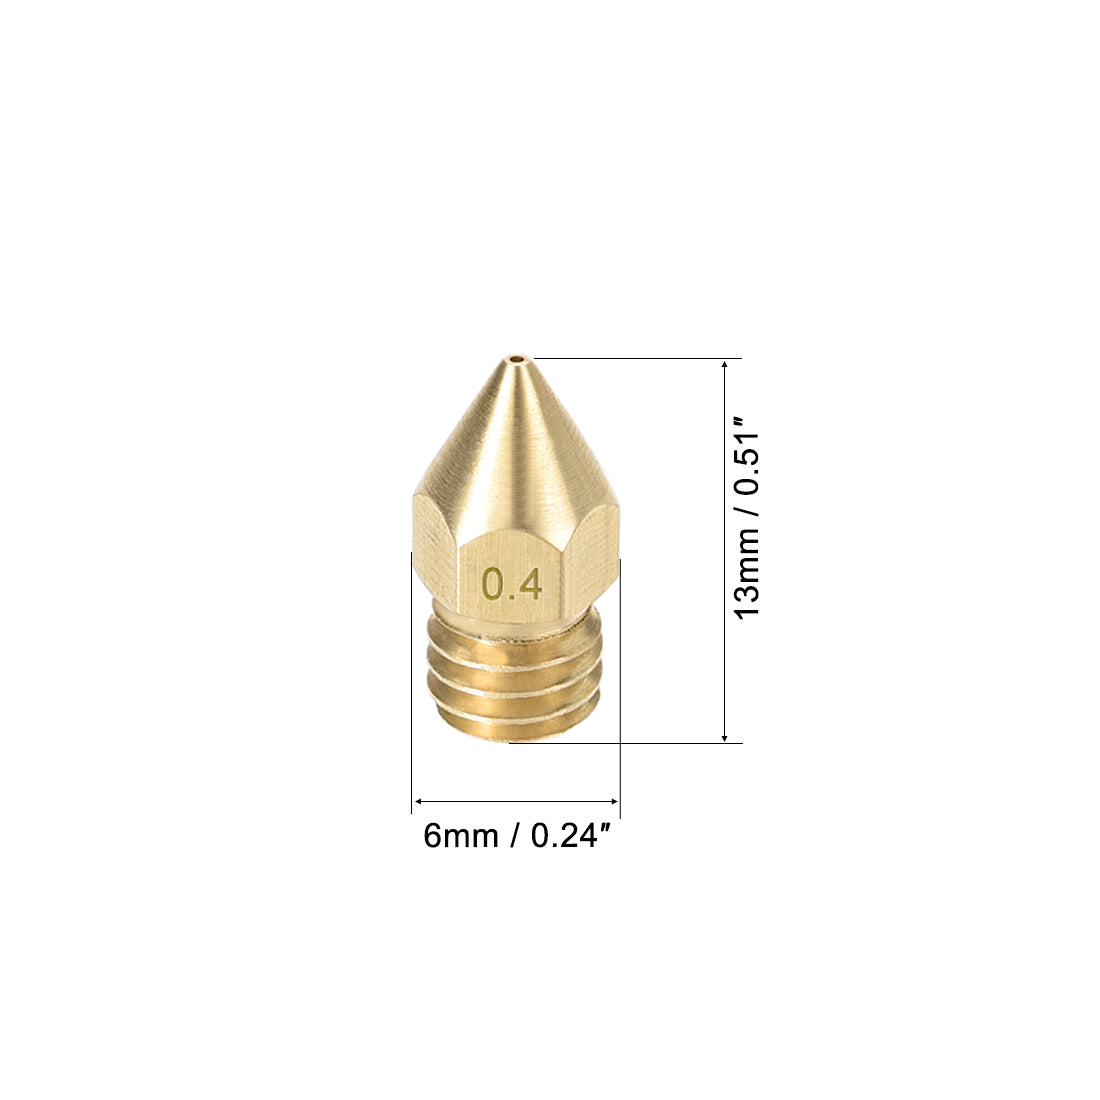 uxcell Uxcell 0.4mm 3D Printer Nozzle, Fit for MK8, for 1.75mm Filament Brass 10pcs